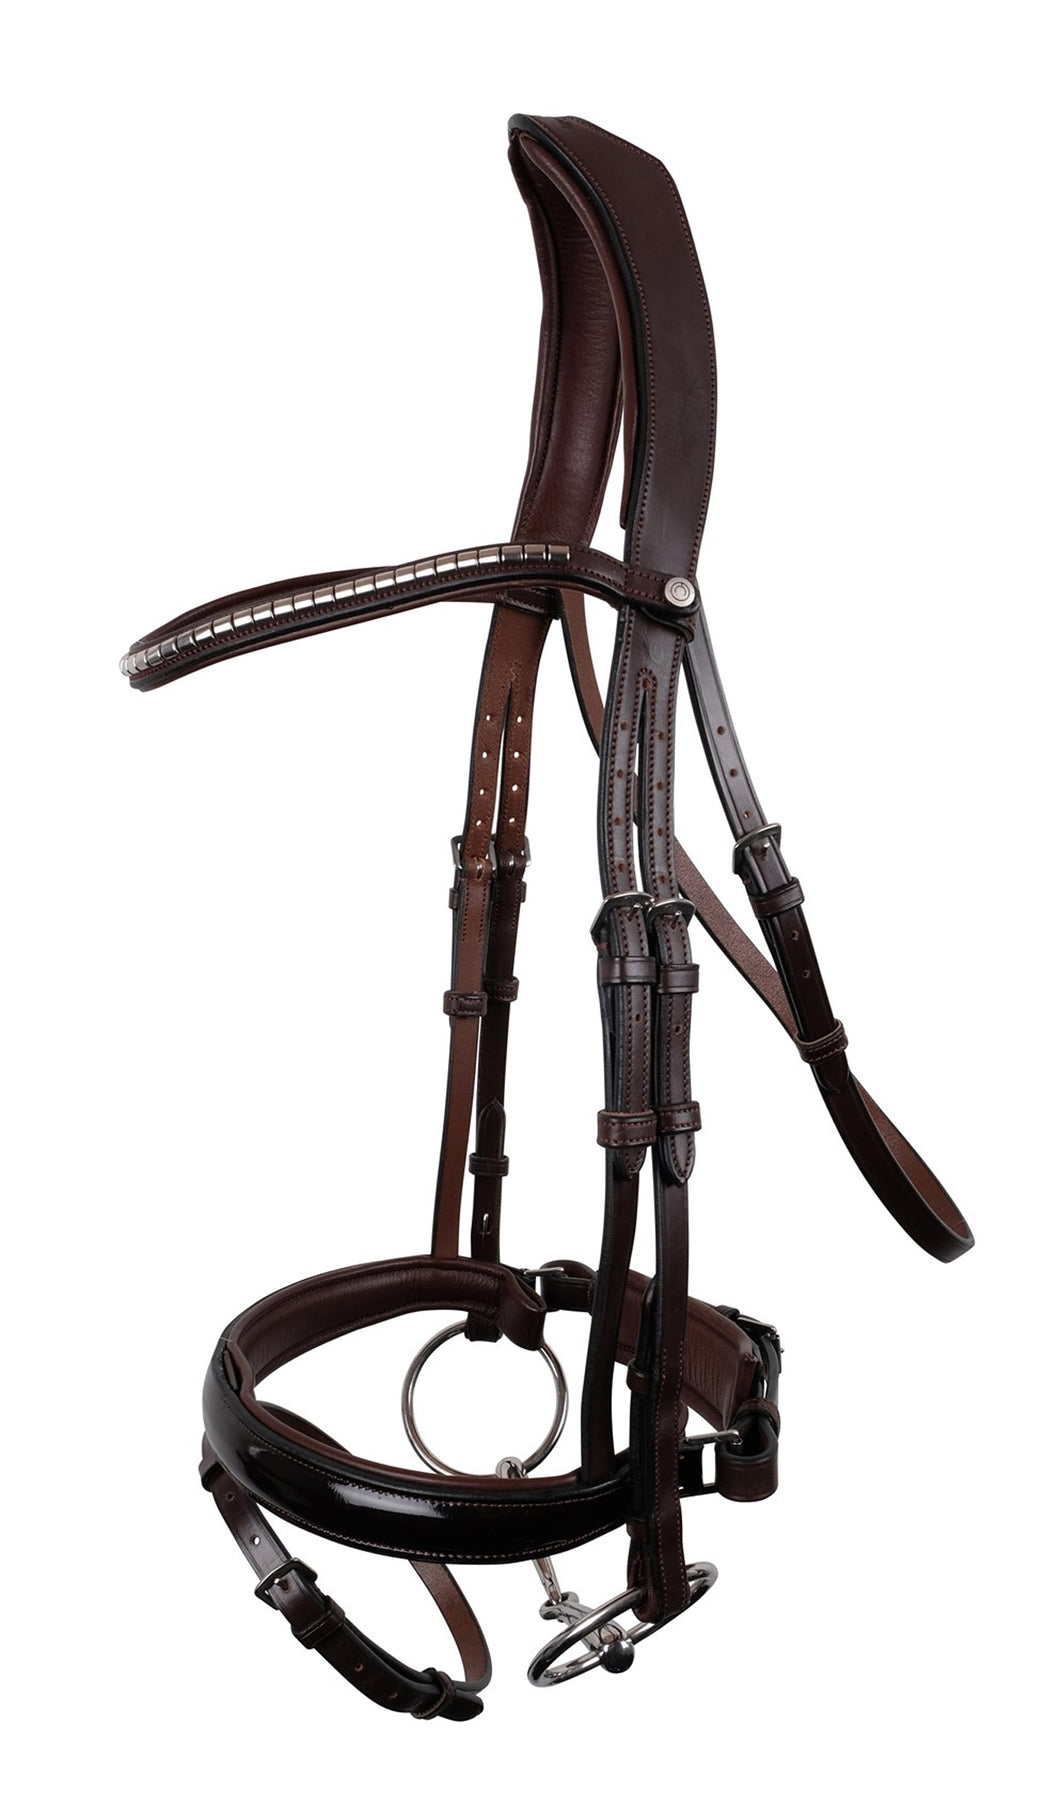 Normandie Deluxe Organic Tanned Bridle - Brown